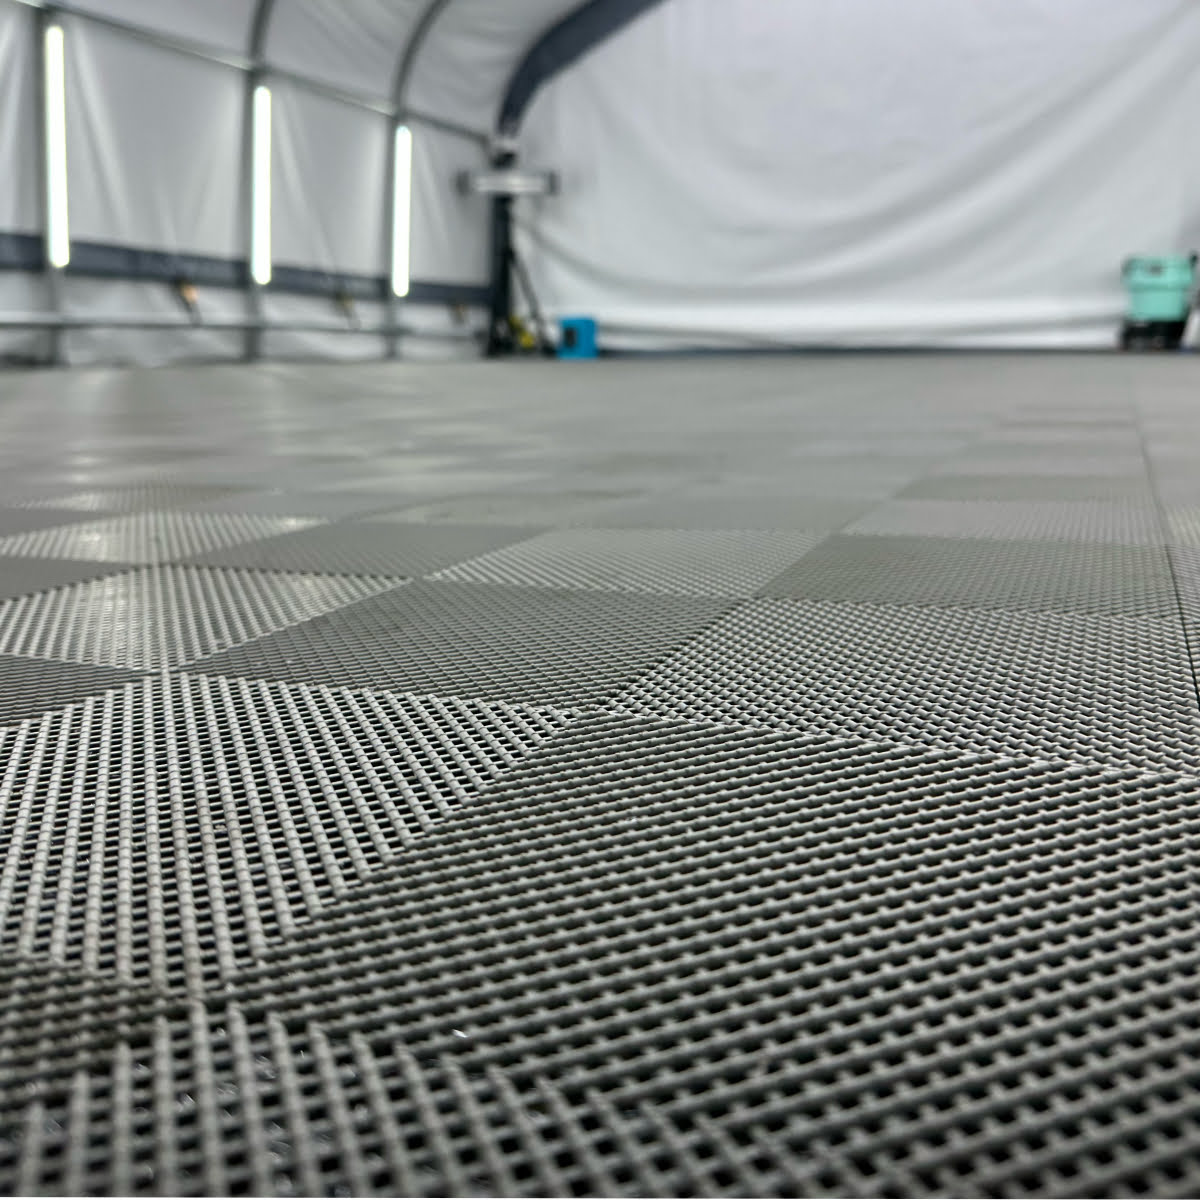 Up close Perforated garage tiles in gray.